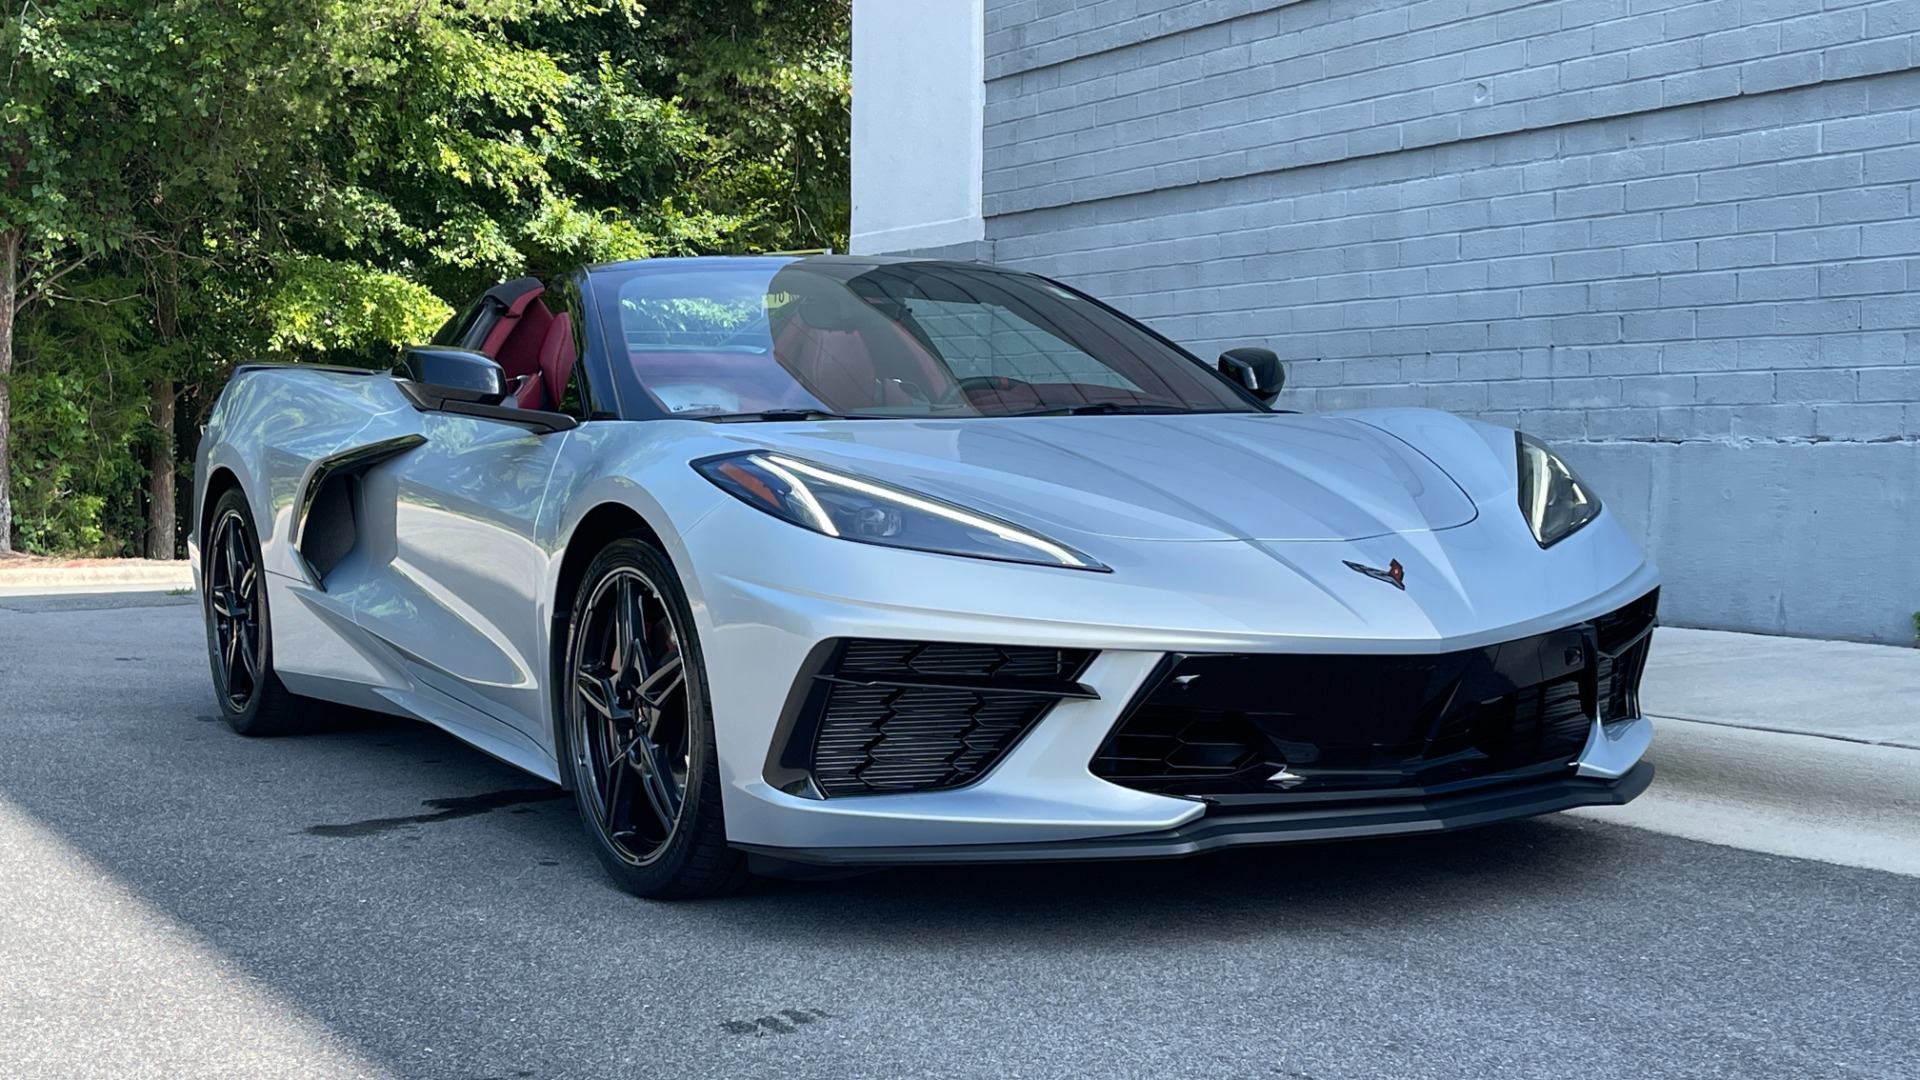 Used 2021 Chevrolet Corvette 3LT CONVERTIBLE MORELLO / Z51 / FRONT LIFT for sale $100,900 at Formula Imports in Charlotte NC 28227 13